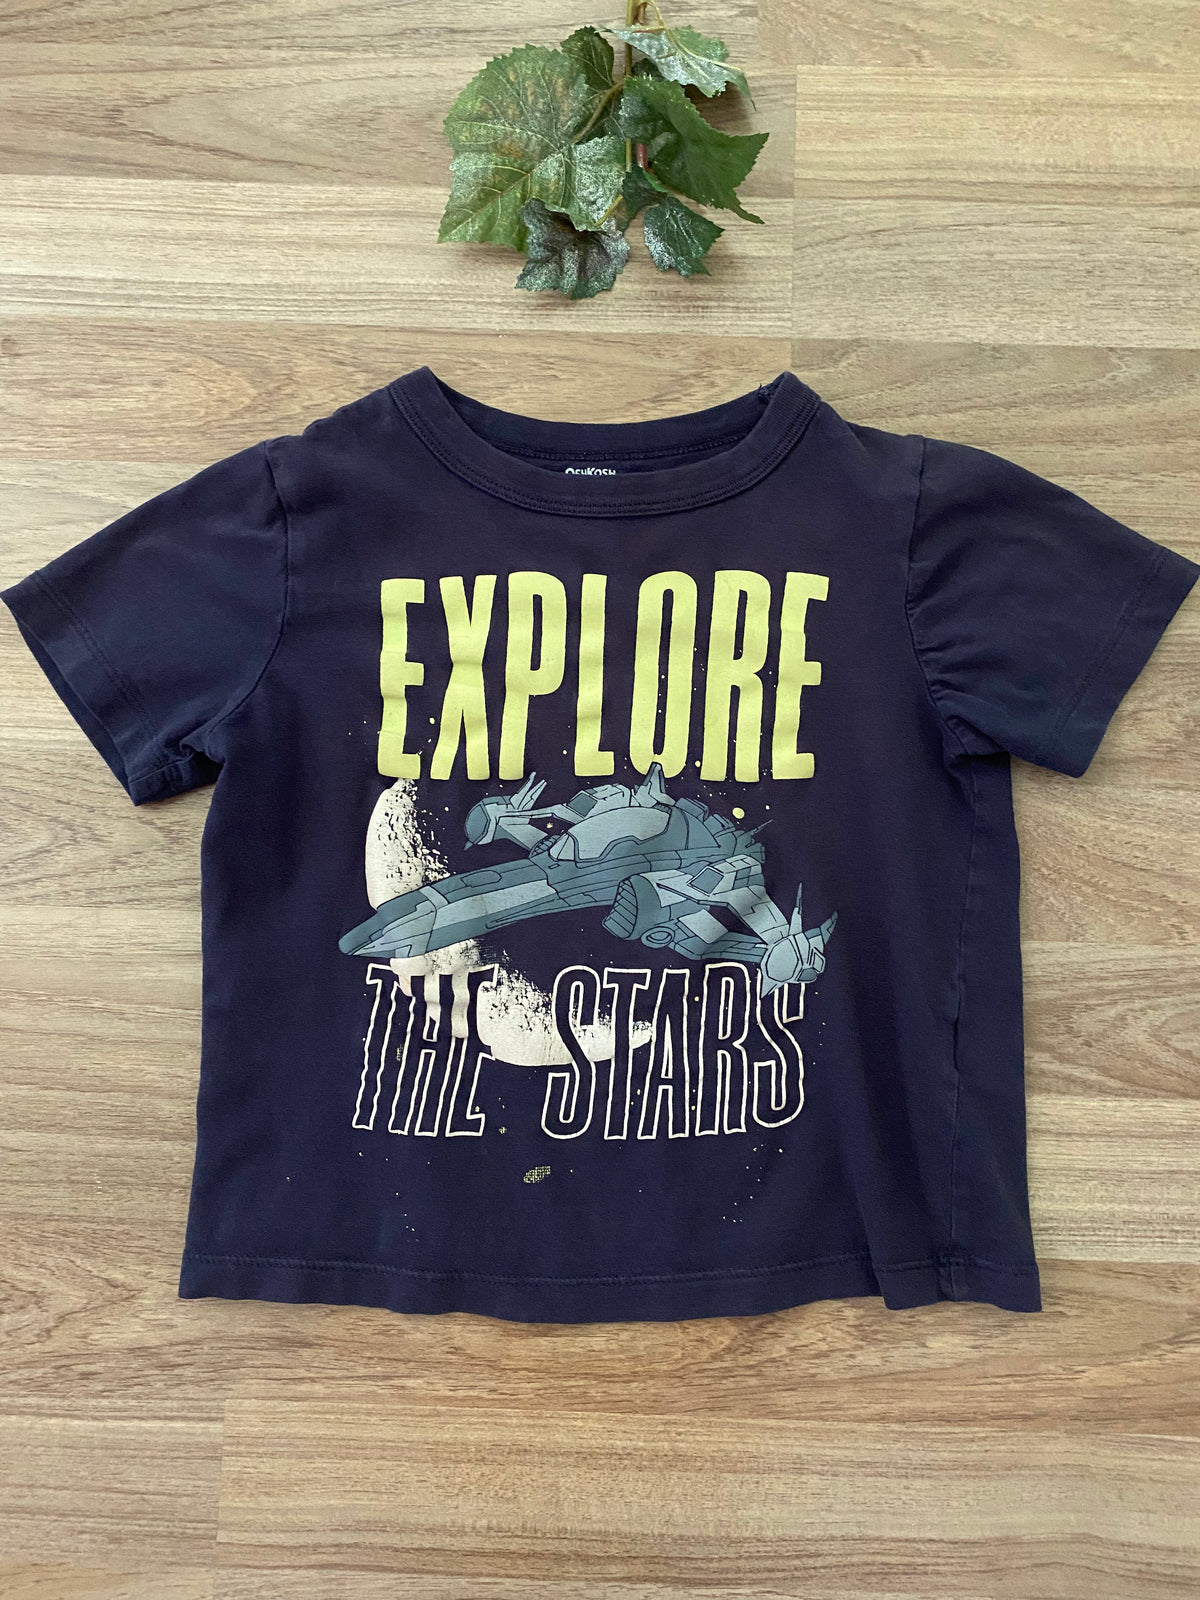 Short Sleeve Graphic Top (Boys Size 4-5)